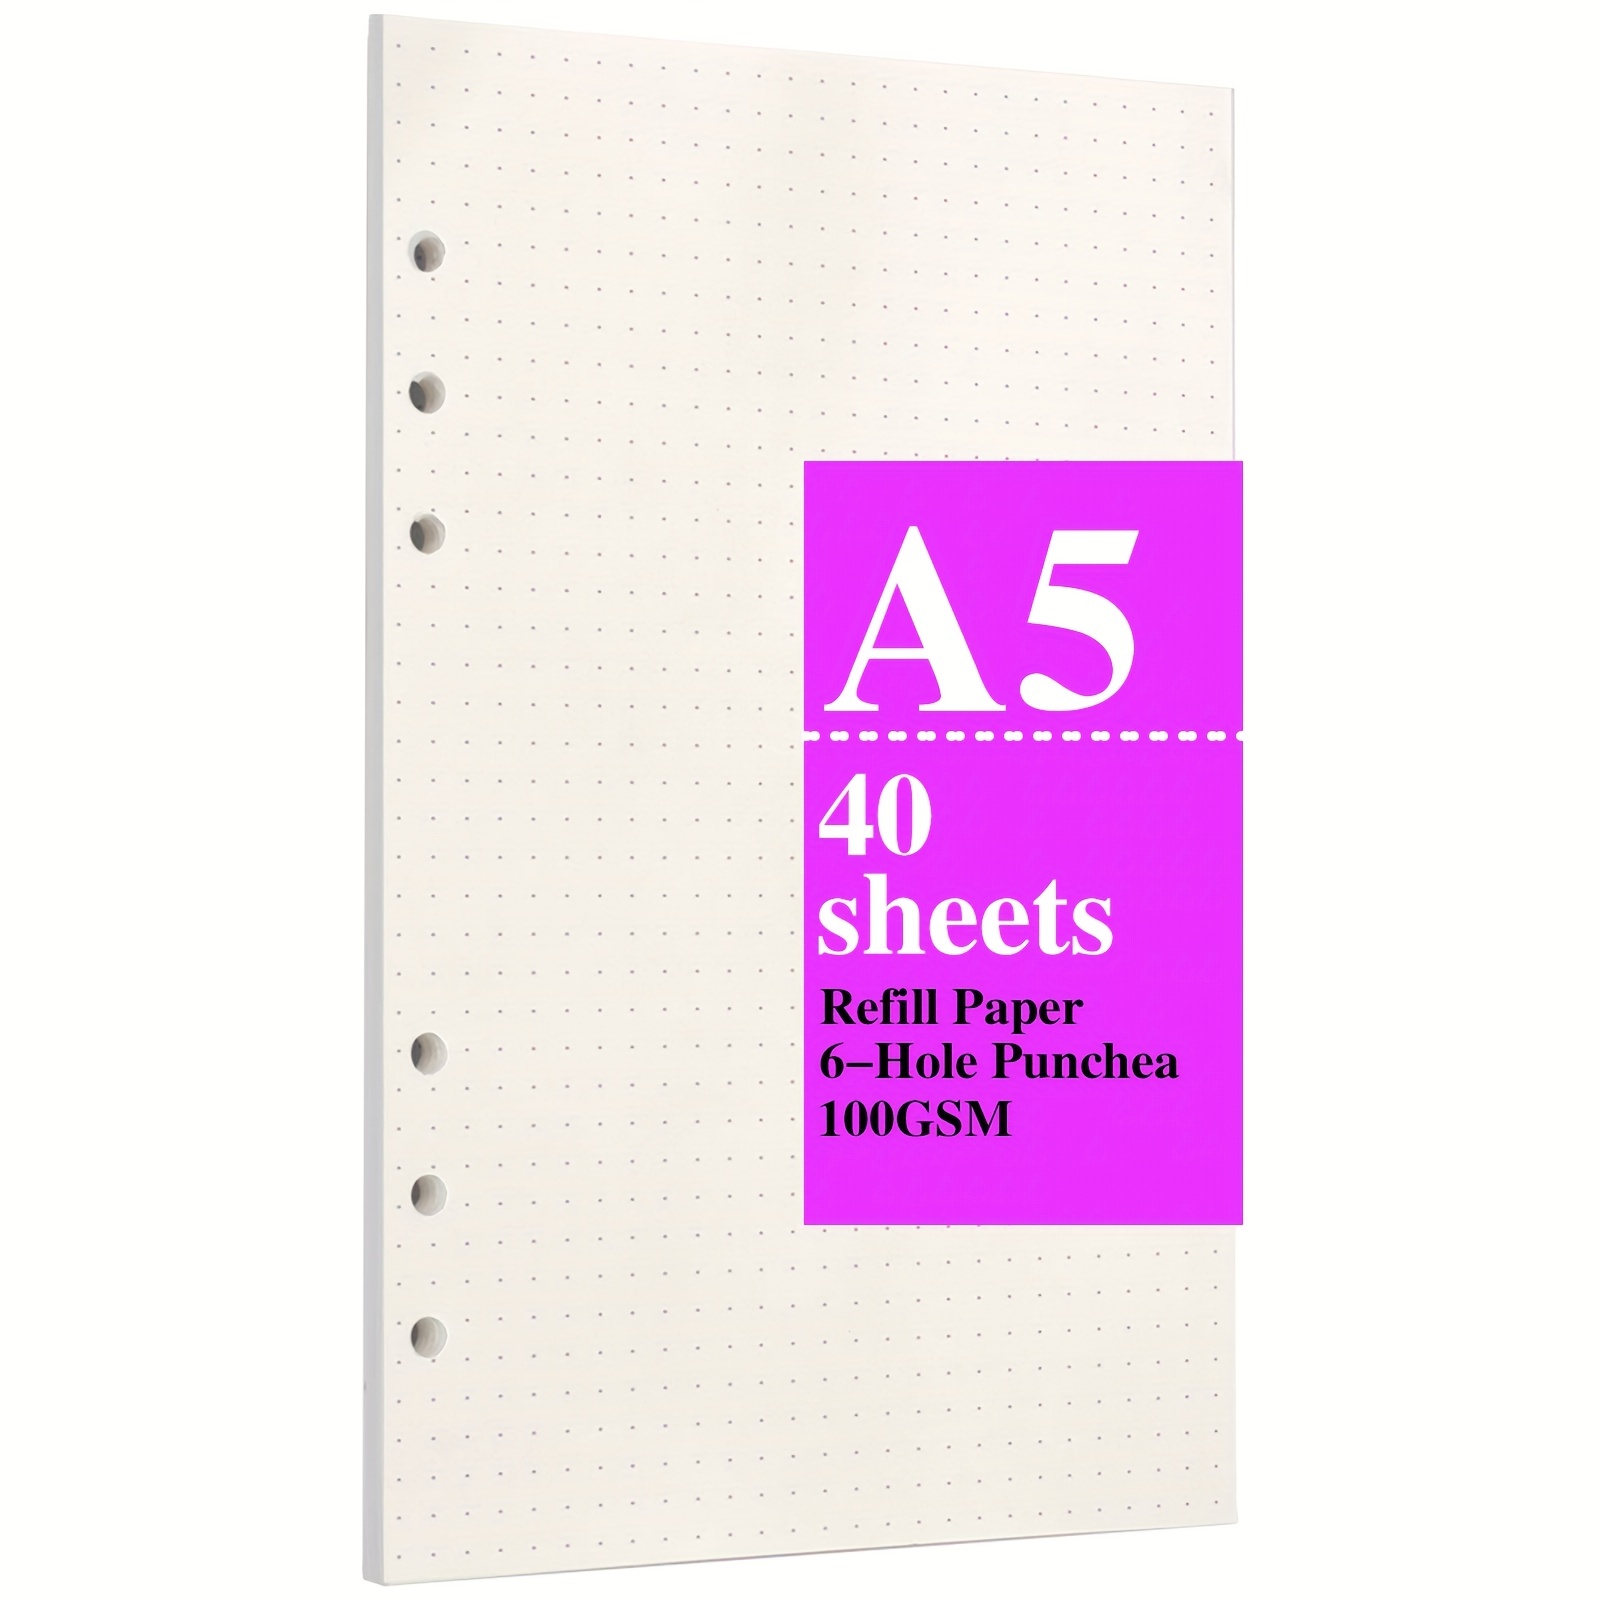  A5 Daily Planner Refill, 6 Ring Binder Inserts, A5